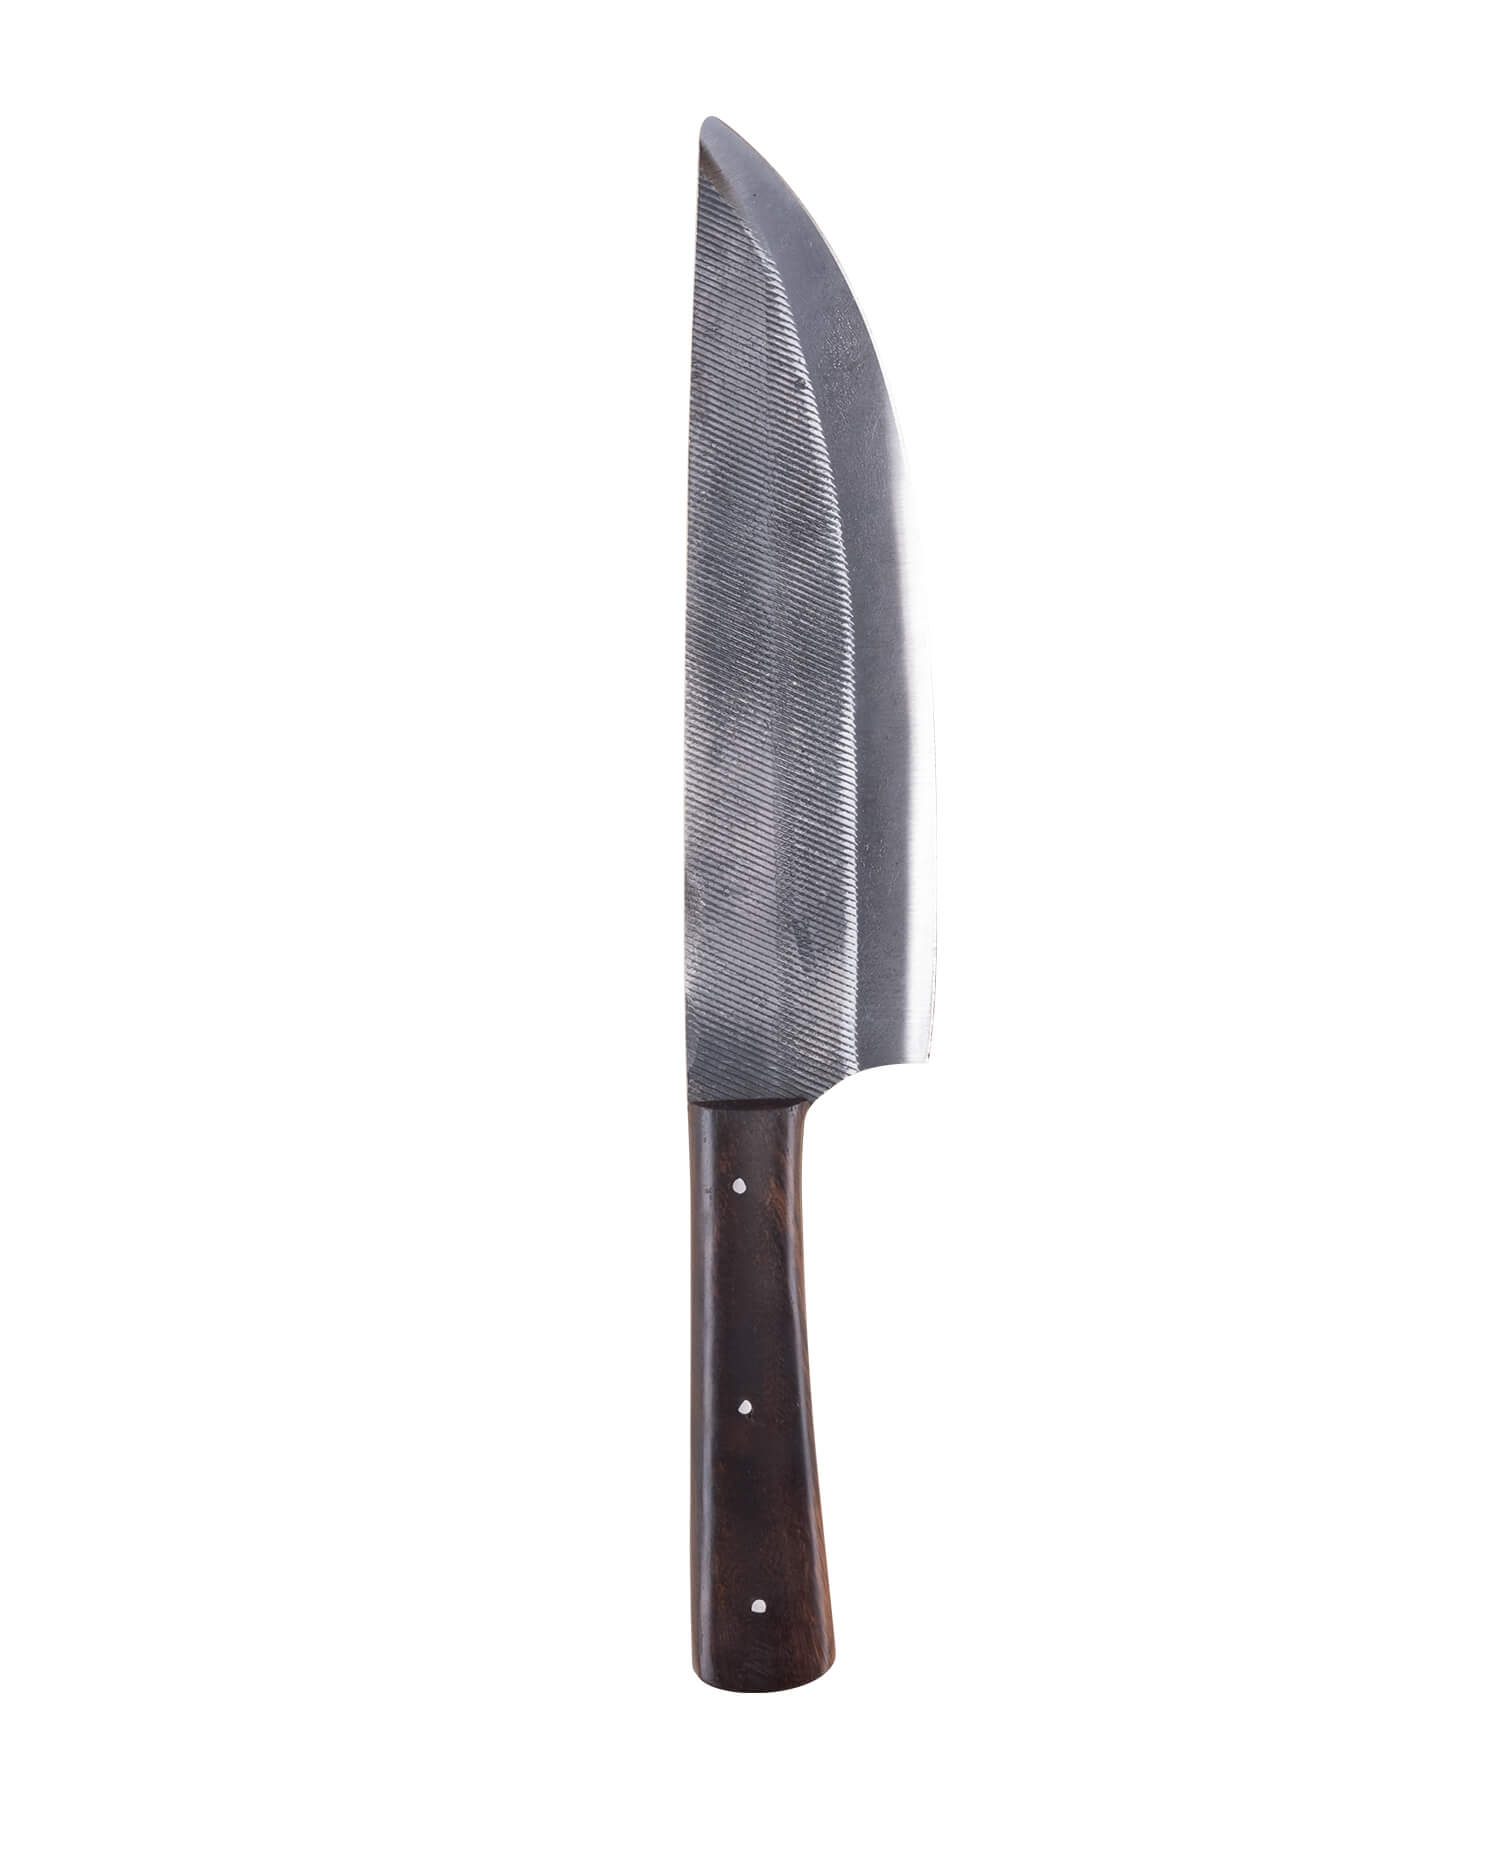 Anselm carving knife